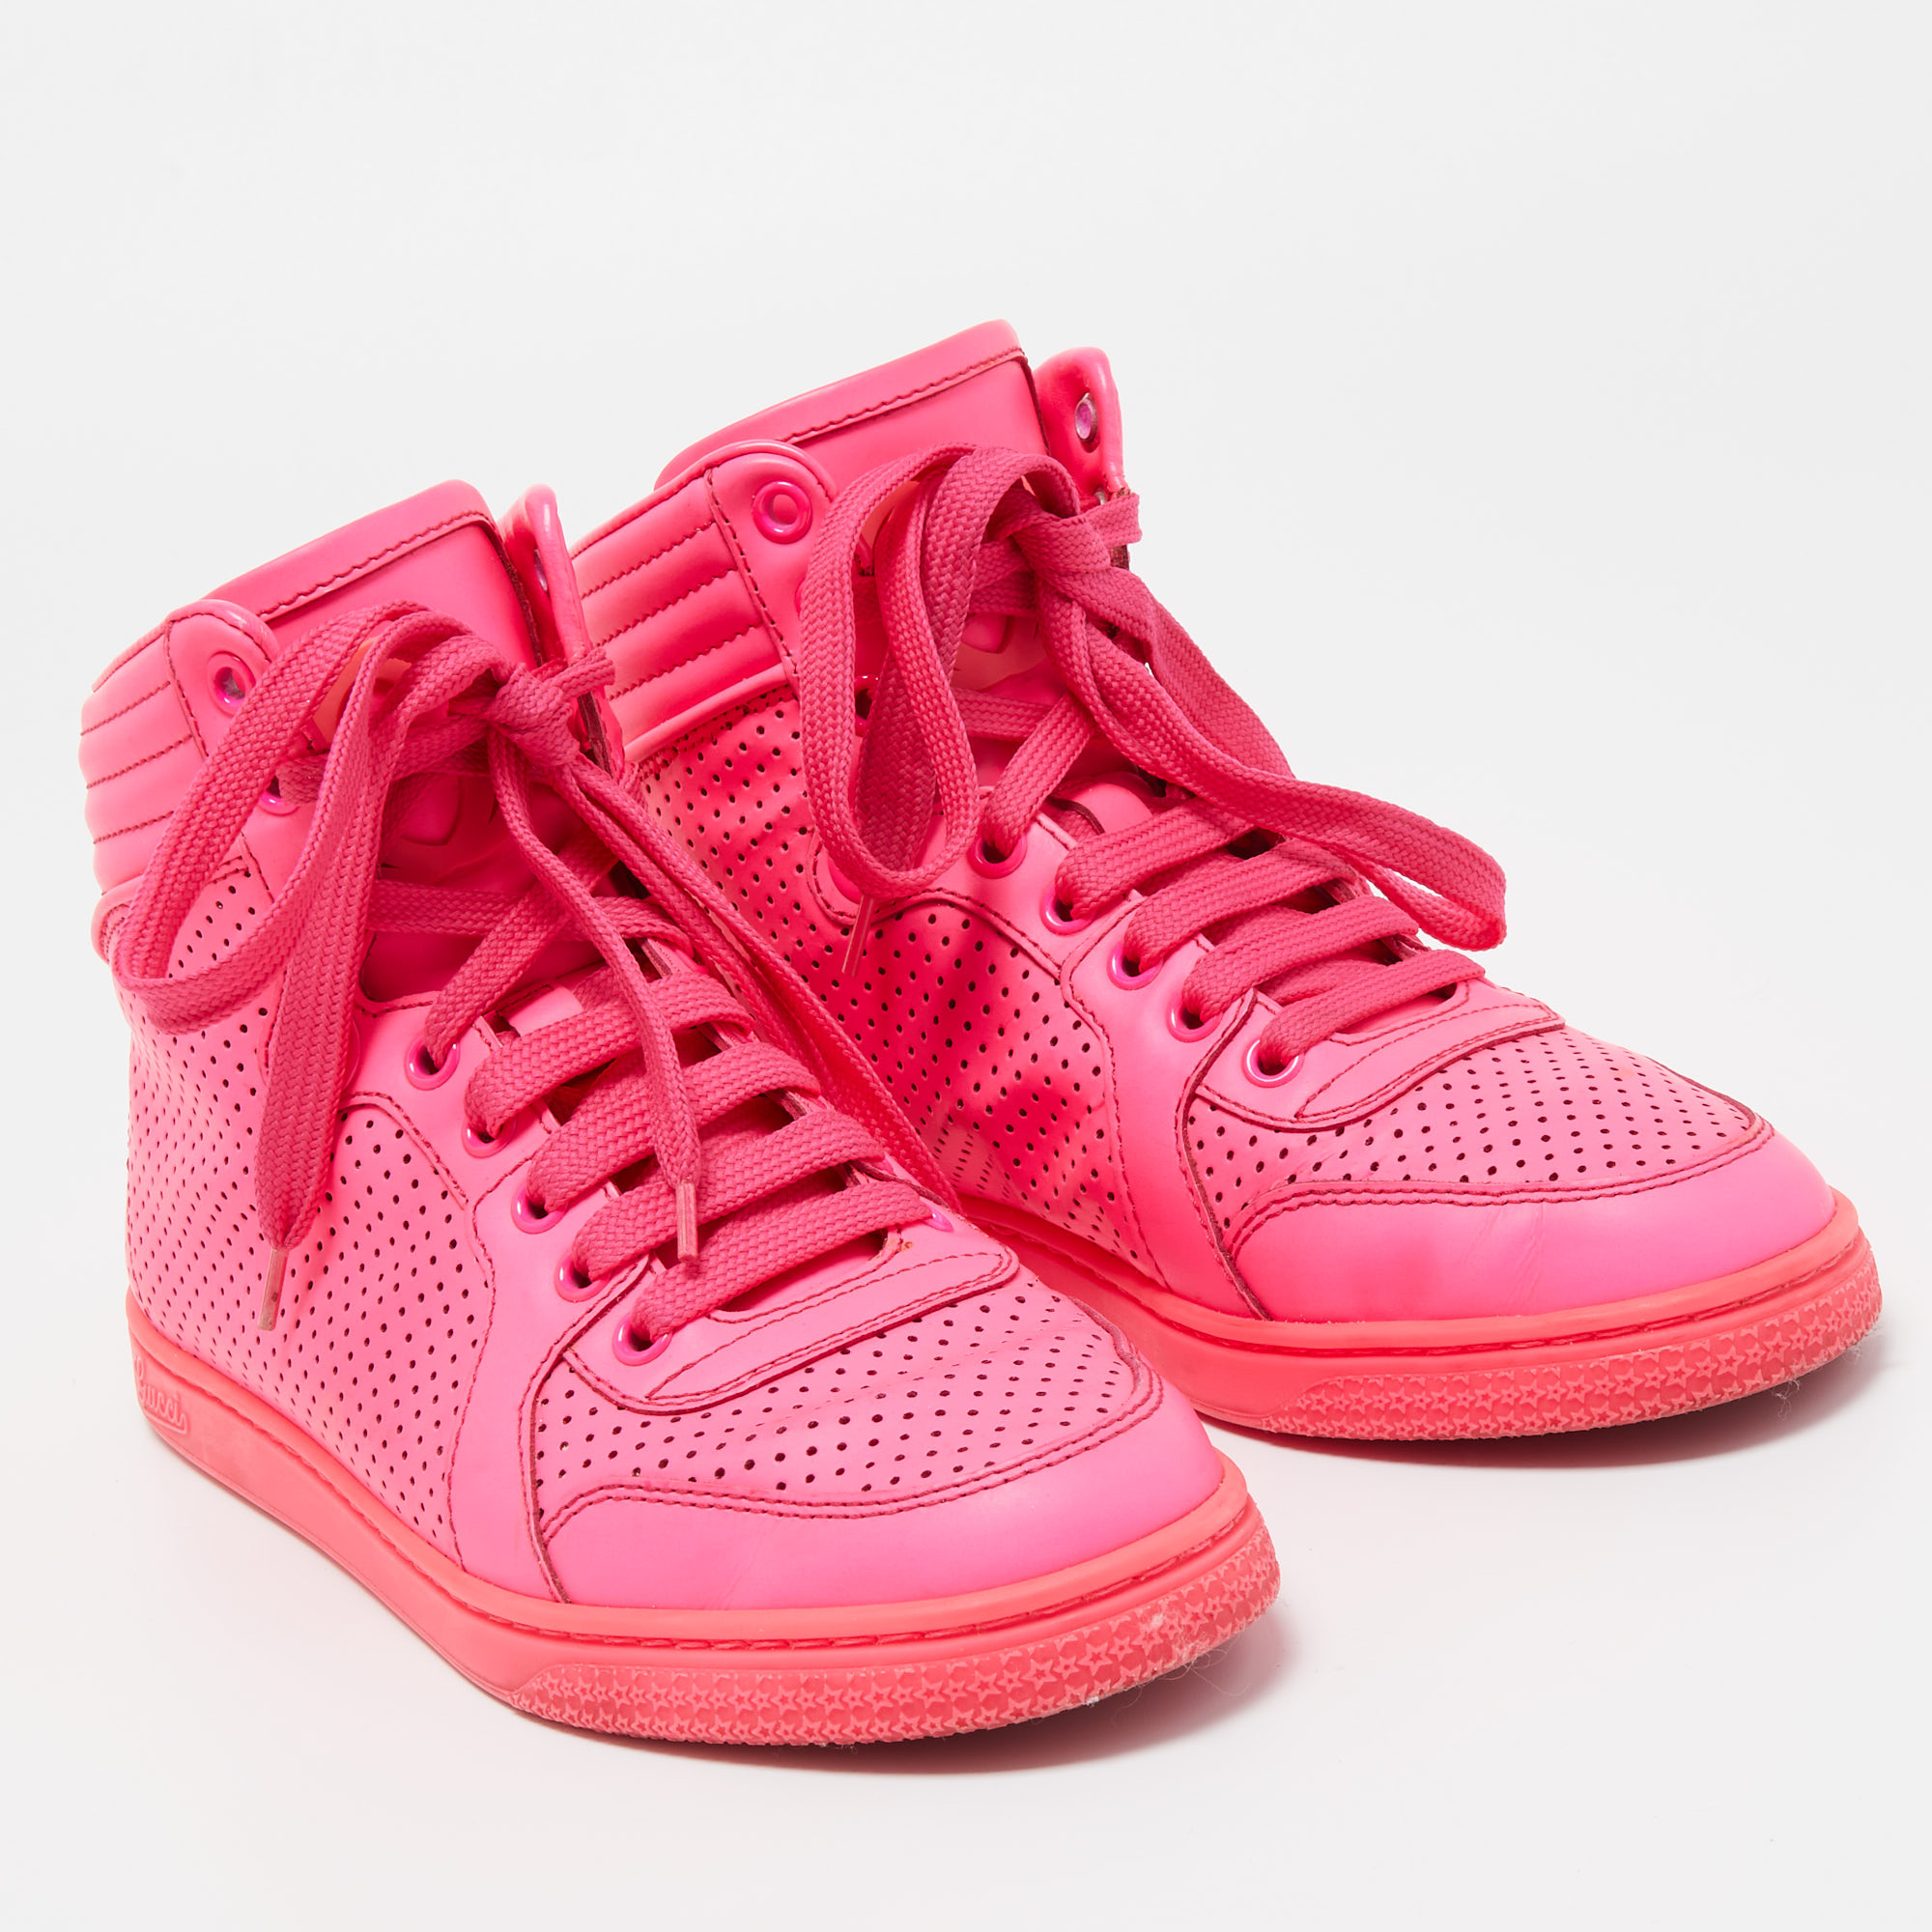 Gucci Neon Pink Perforated Leather Coda High Top Sneakers Size 35.5